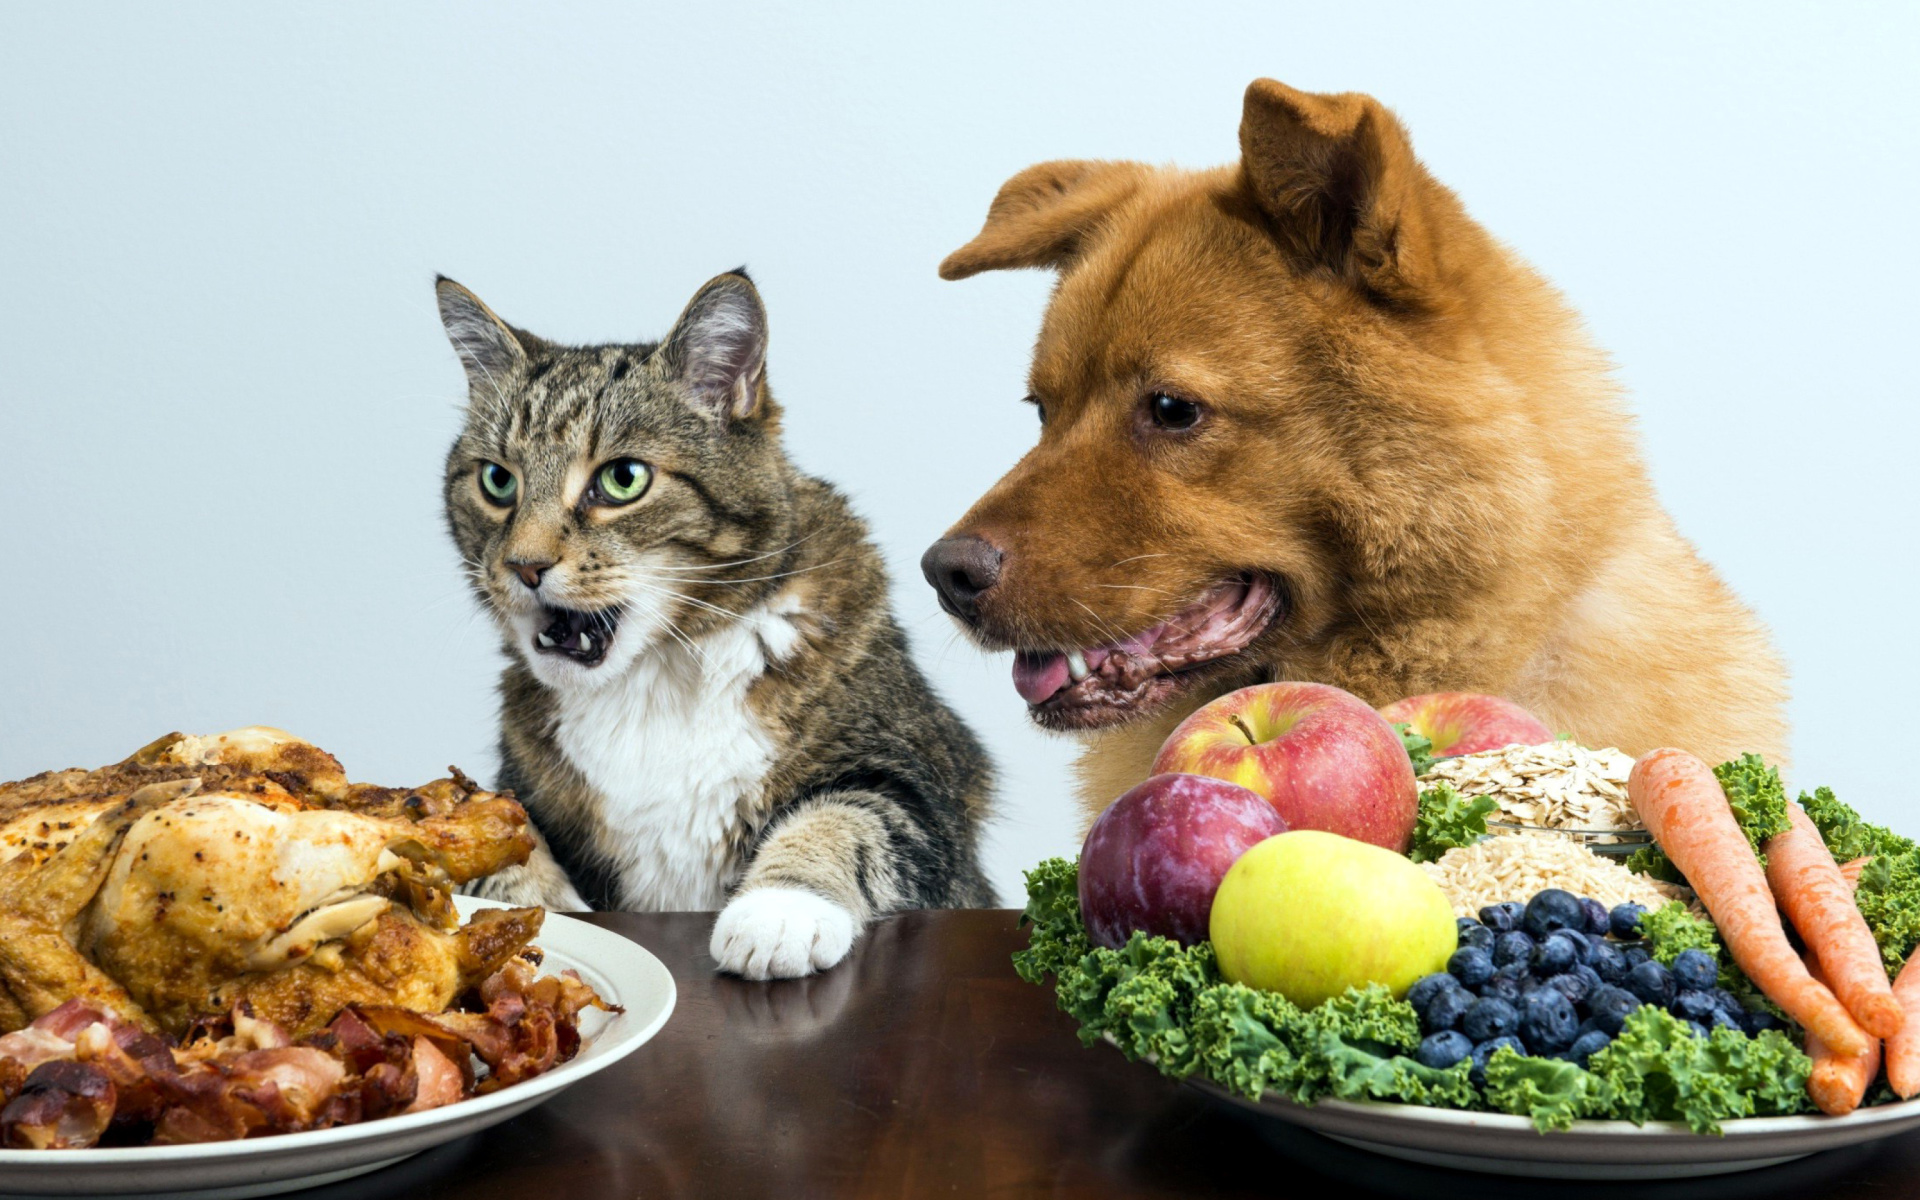 Dog and Cat Dinner wallpaper 1920x1200